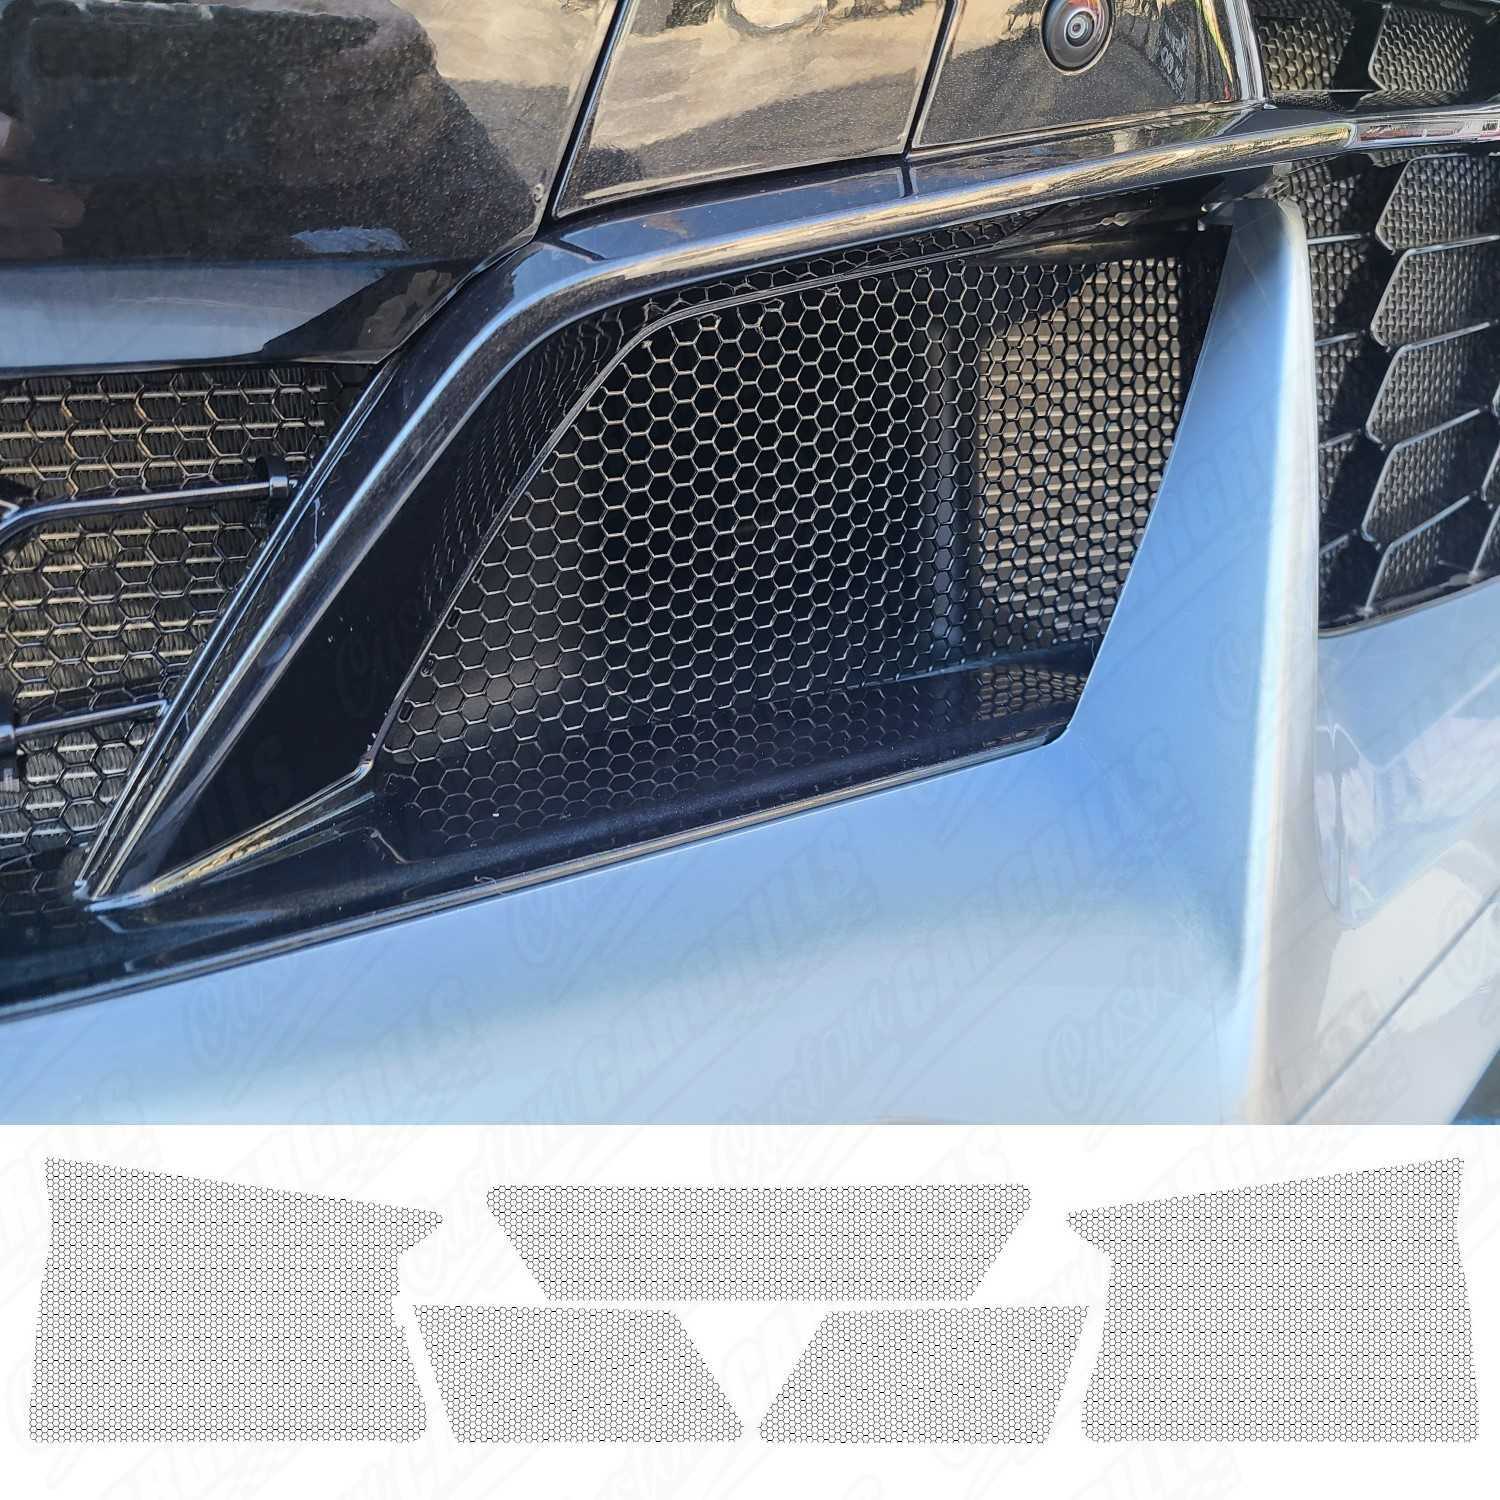 C8 Z06 Vette Mesh Sets Available Now! Protect your radiators without breaking the bank